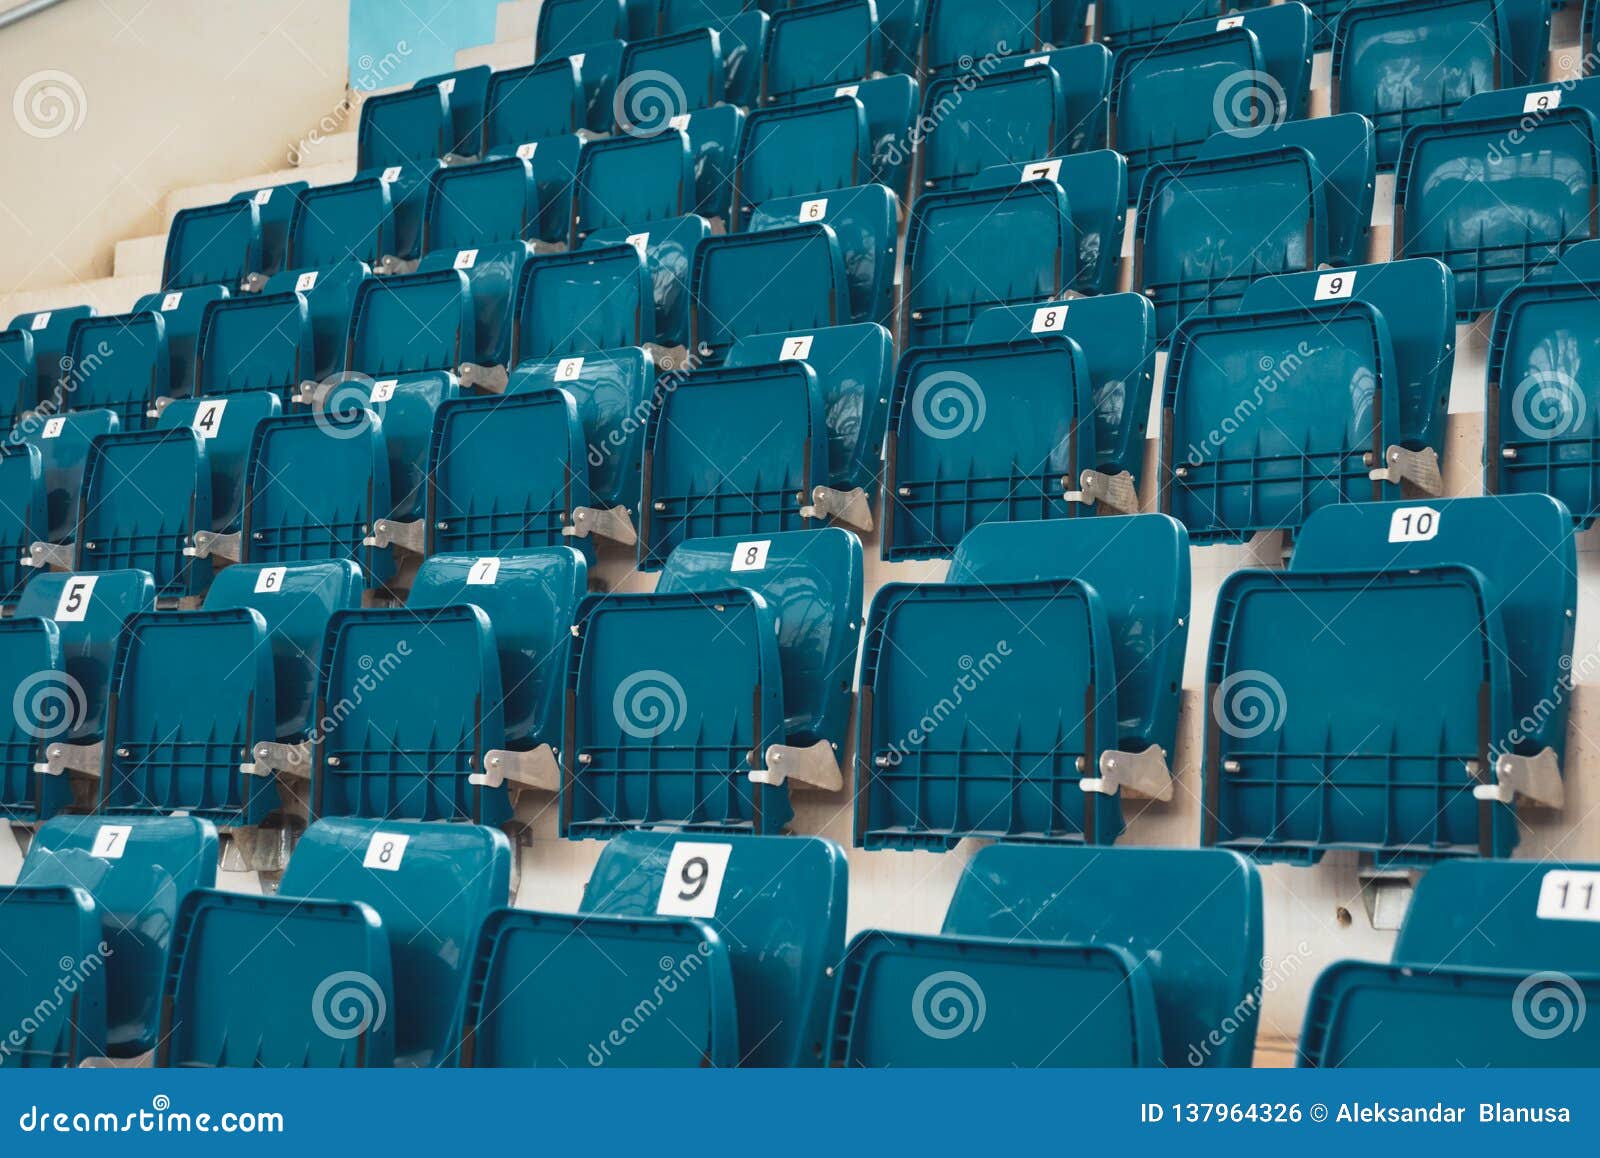 blue plastic chairs on the stands of the sports hall